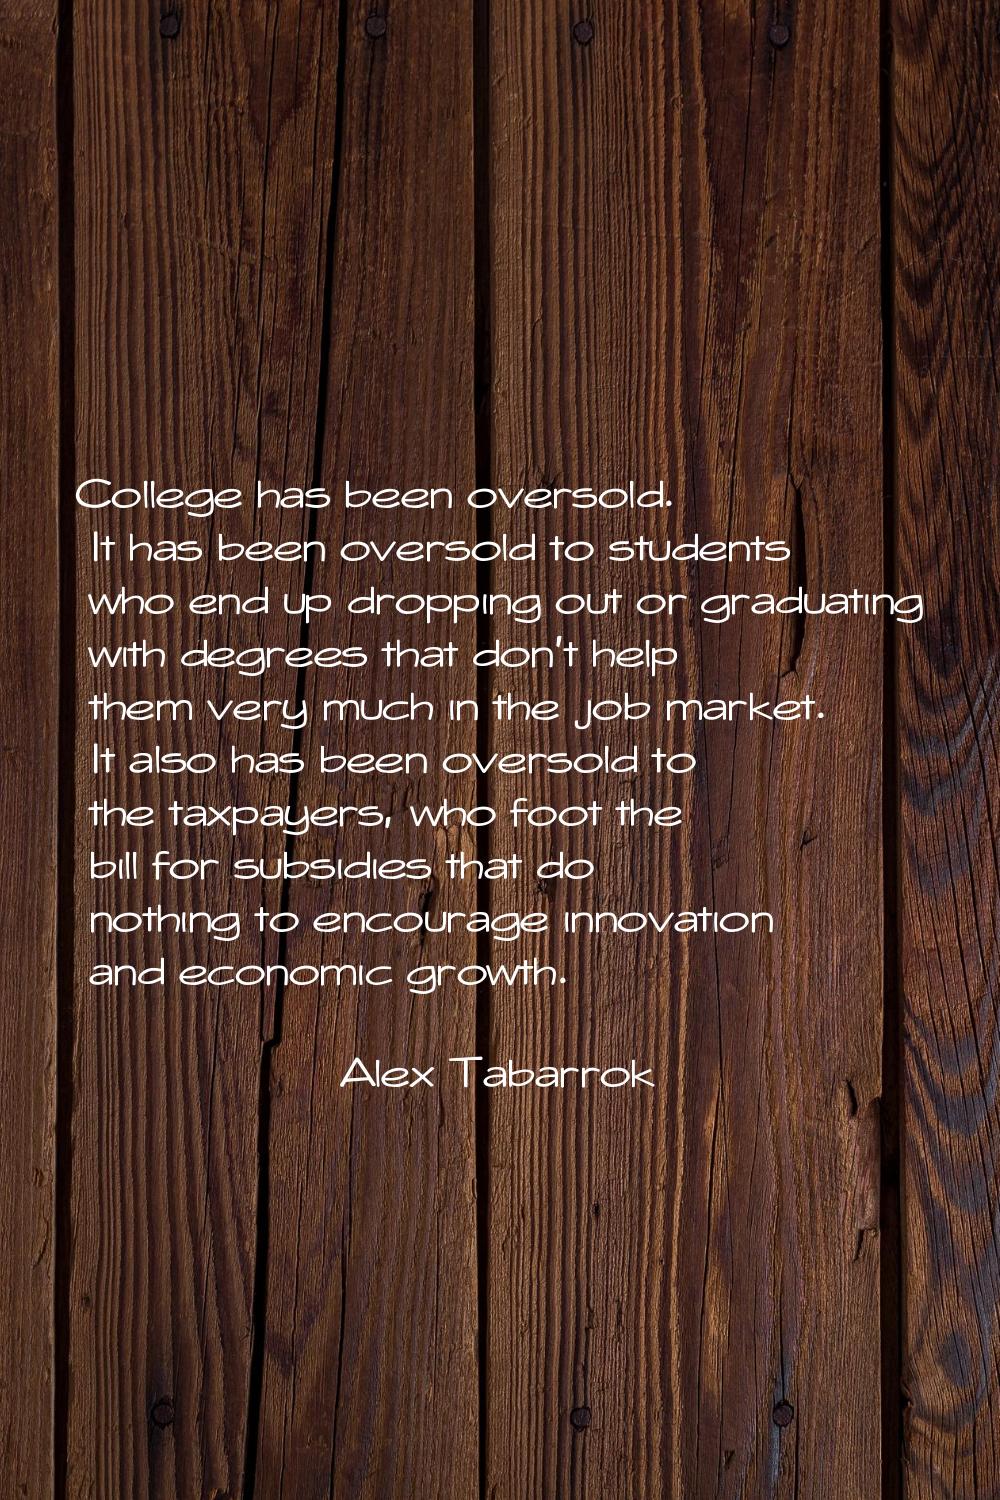 College has been oversold. It has been oversold to students who end up dropping out or graduating w